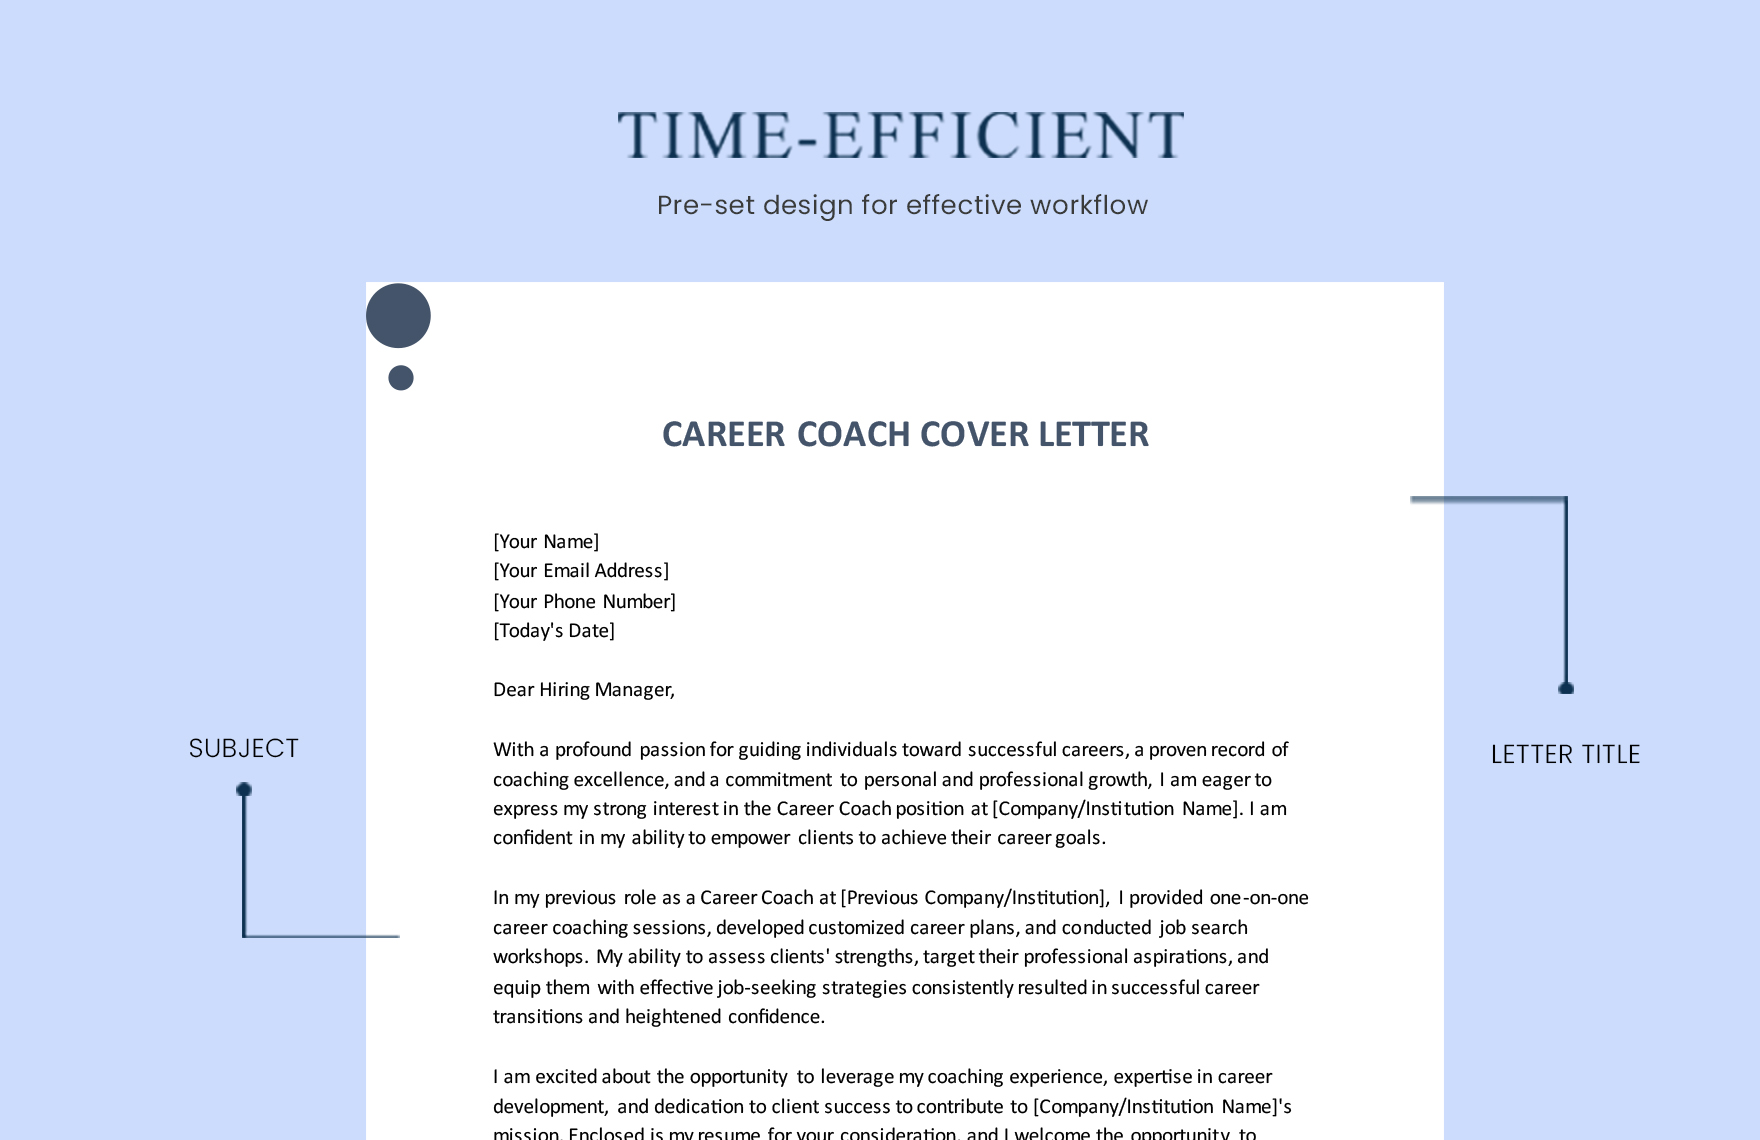 Career Coach Cover Letter